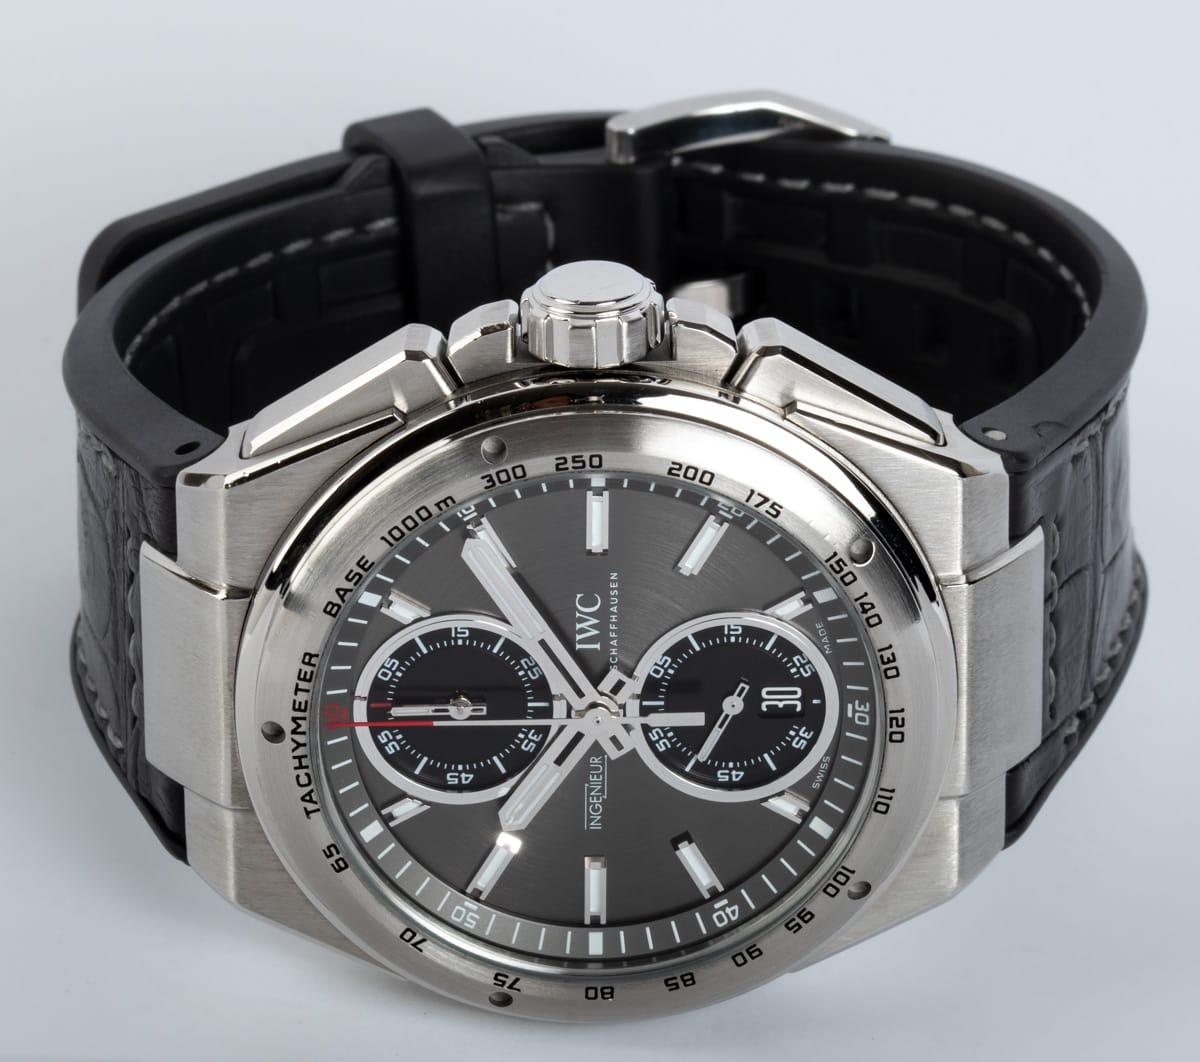 Front View of Ingenieur Chronograph Racer